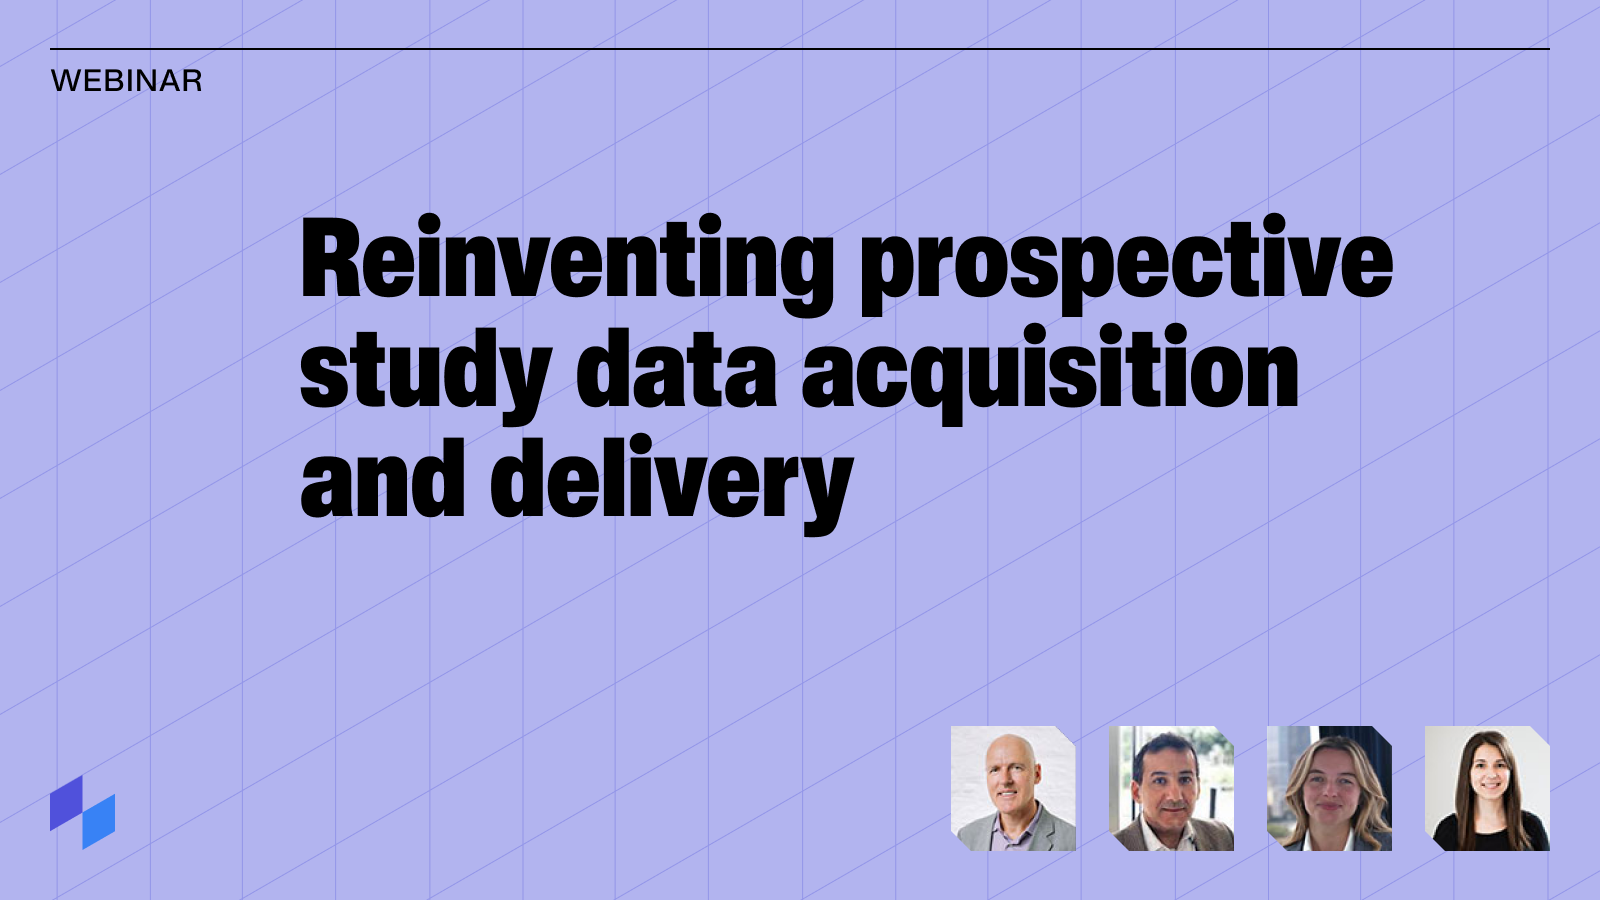 Reinventing prospective study data acquisition and delivery